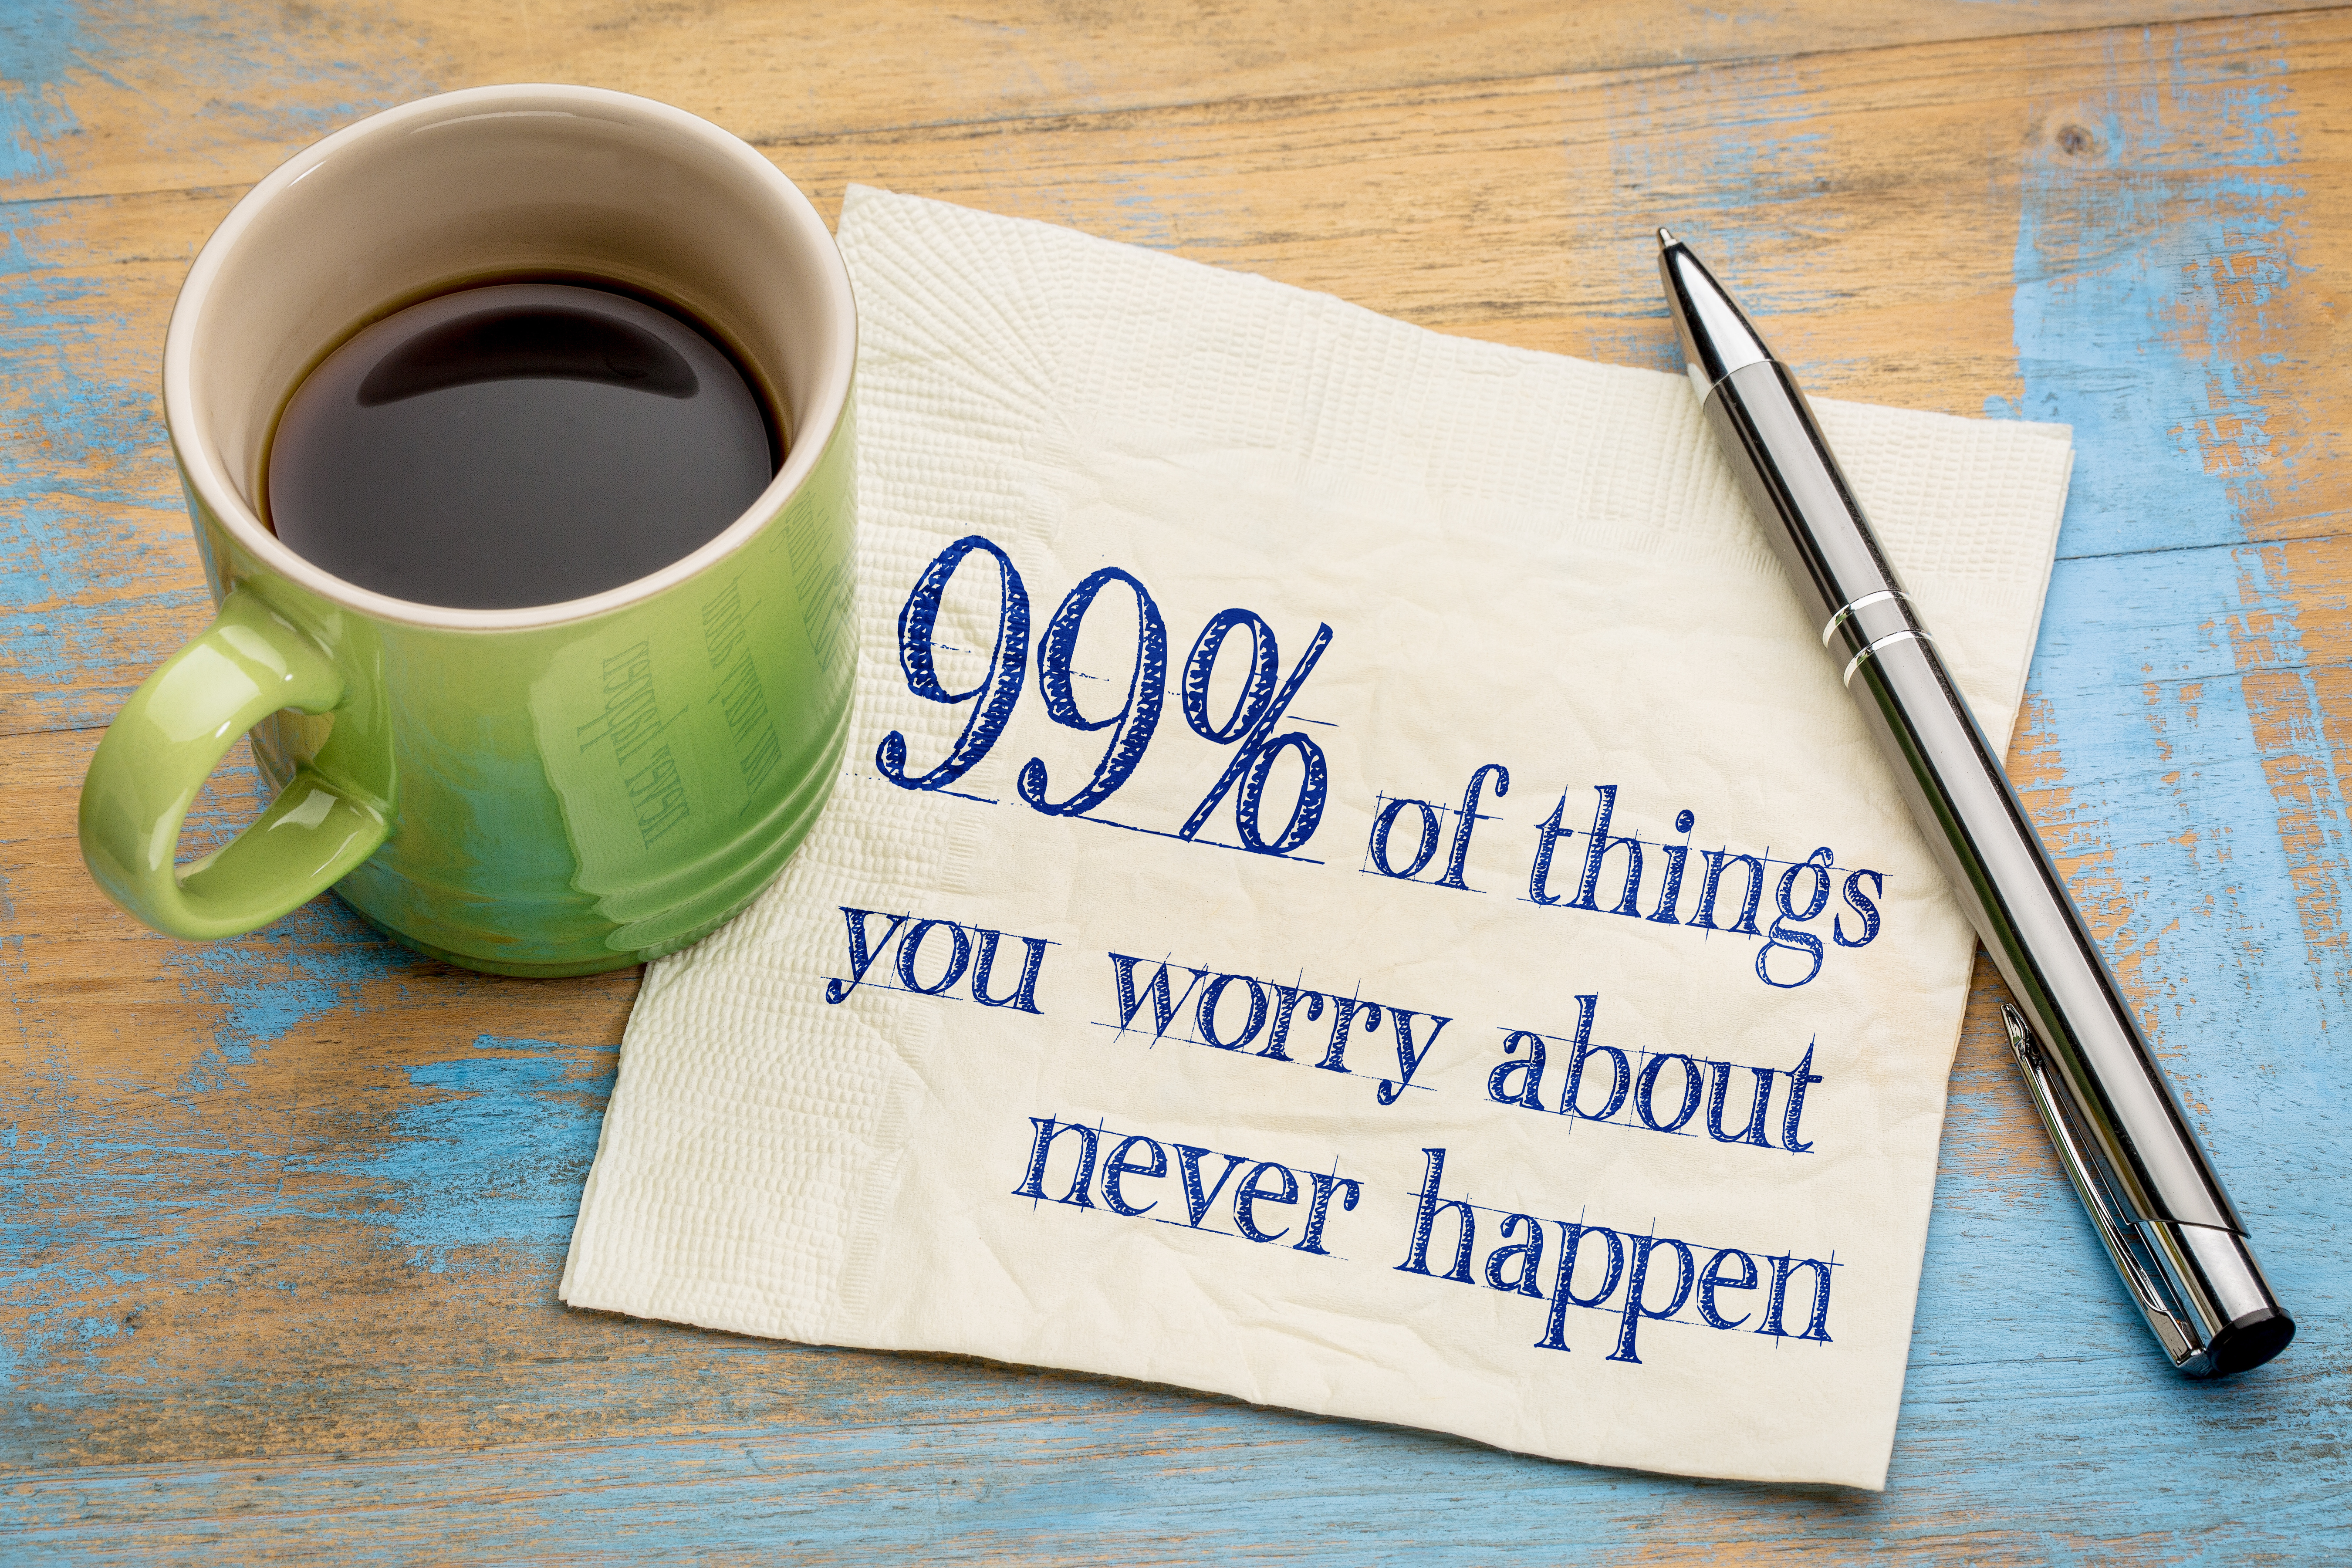 99% Of Things We Are Worrying About  Never Happen - Handwriting On A Napkin With A Cup Of Espresso Coffee